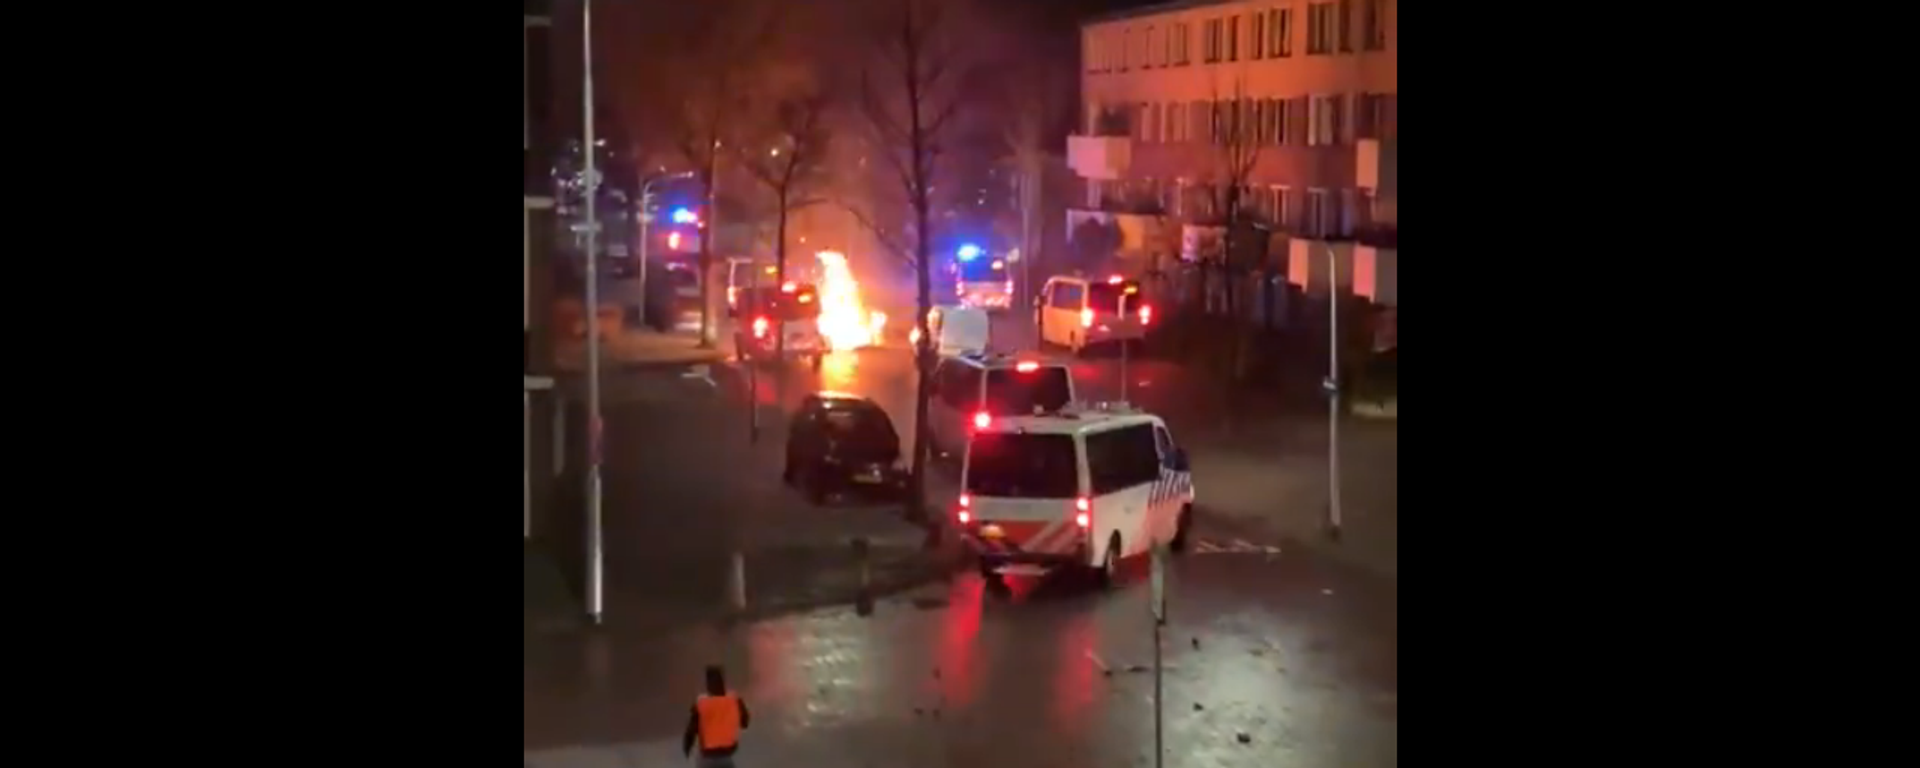 Screenshot of a video showing flames on a city street in the Netherlands during anti-lockdownprotests - Sputnik International, 1920, 25.01.2021